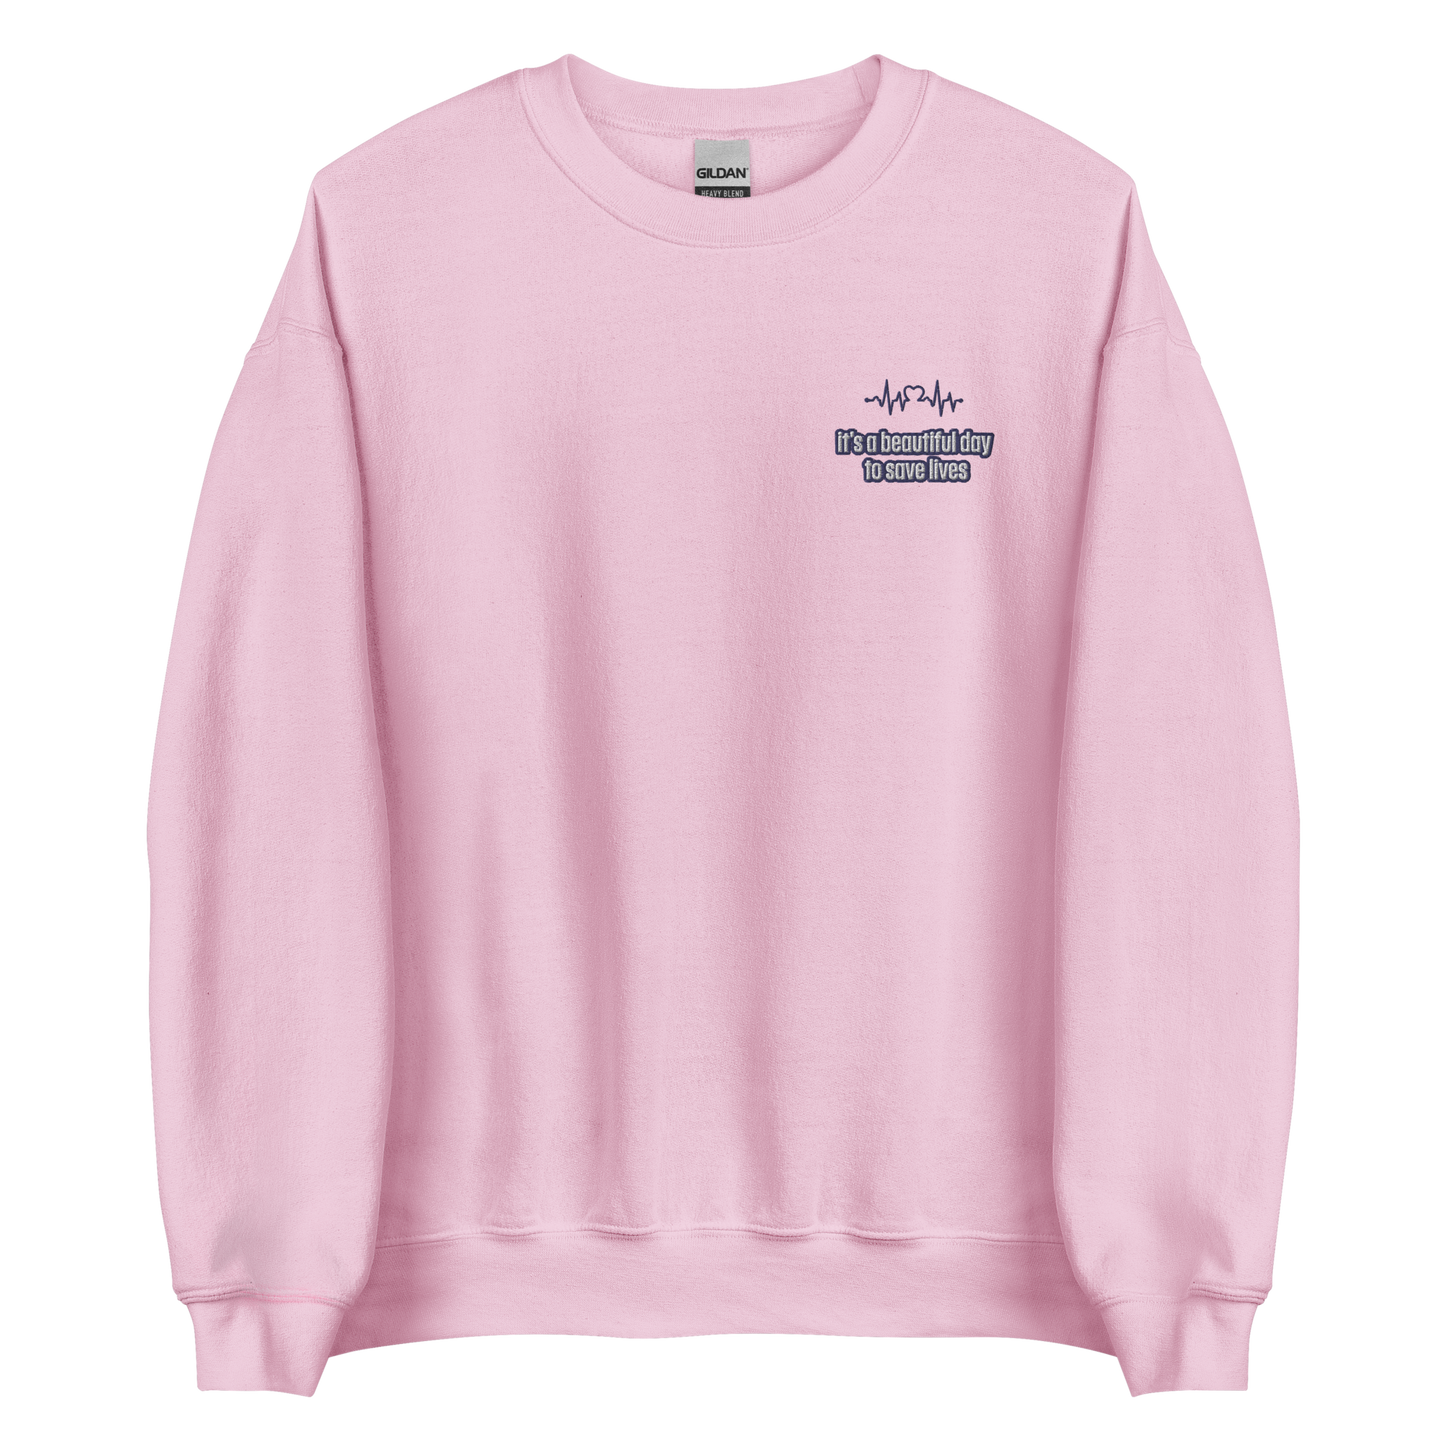 A Beautiful Day To Save Lives Sweatshirt